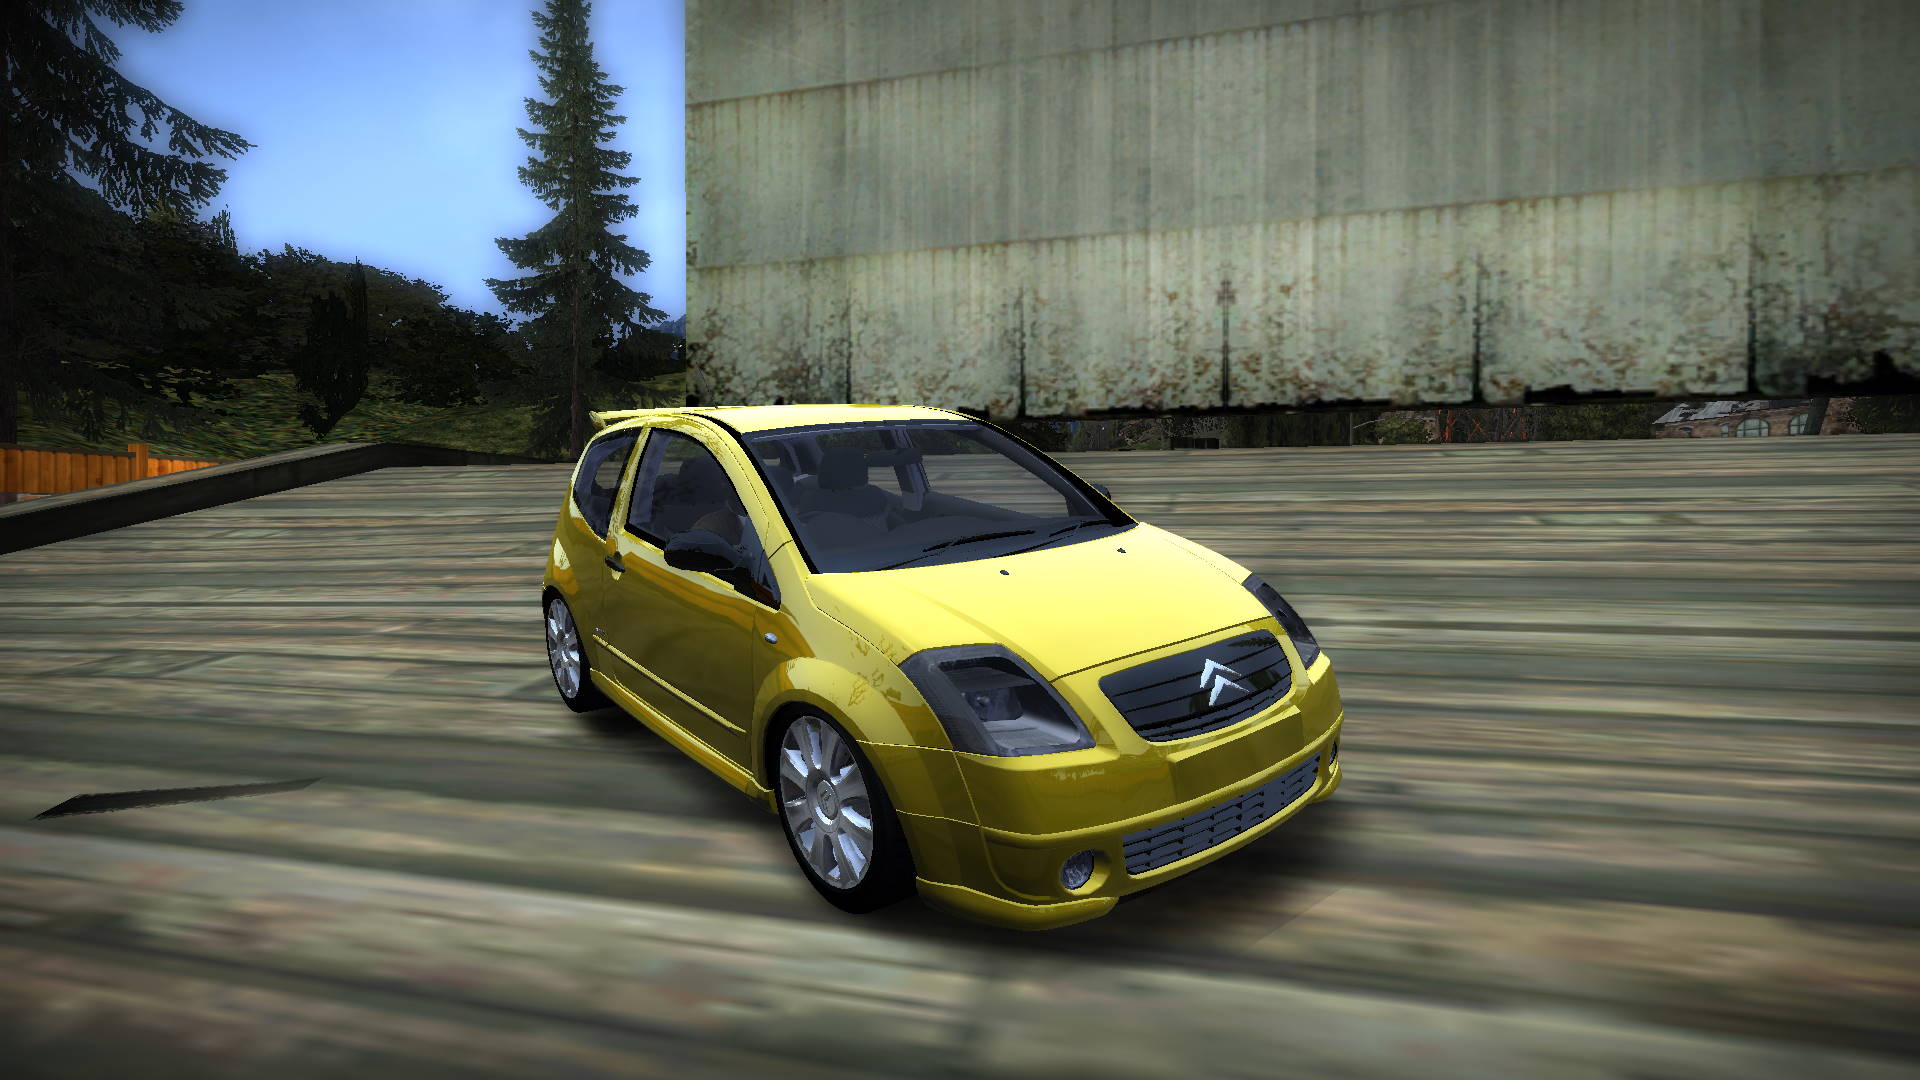 Need For Speed Most Wanted 2004 Citroen C2 VTR